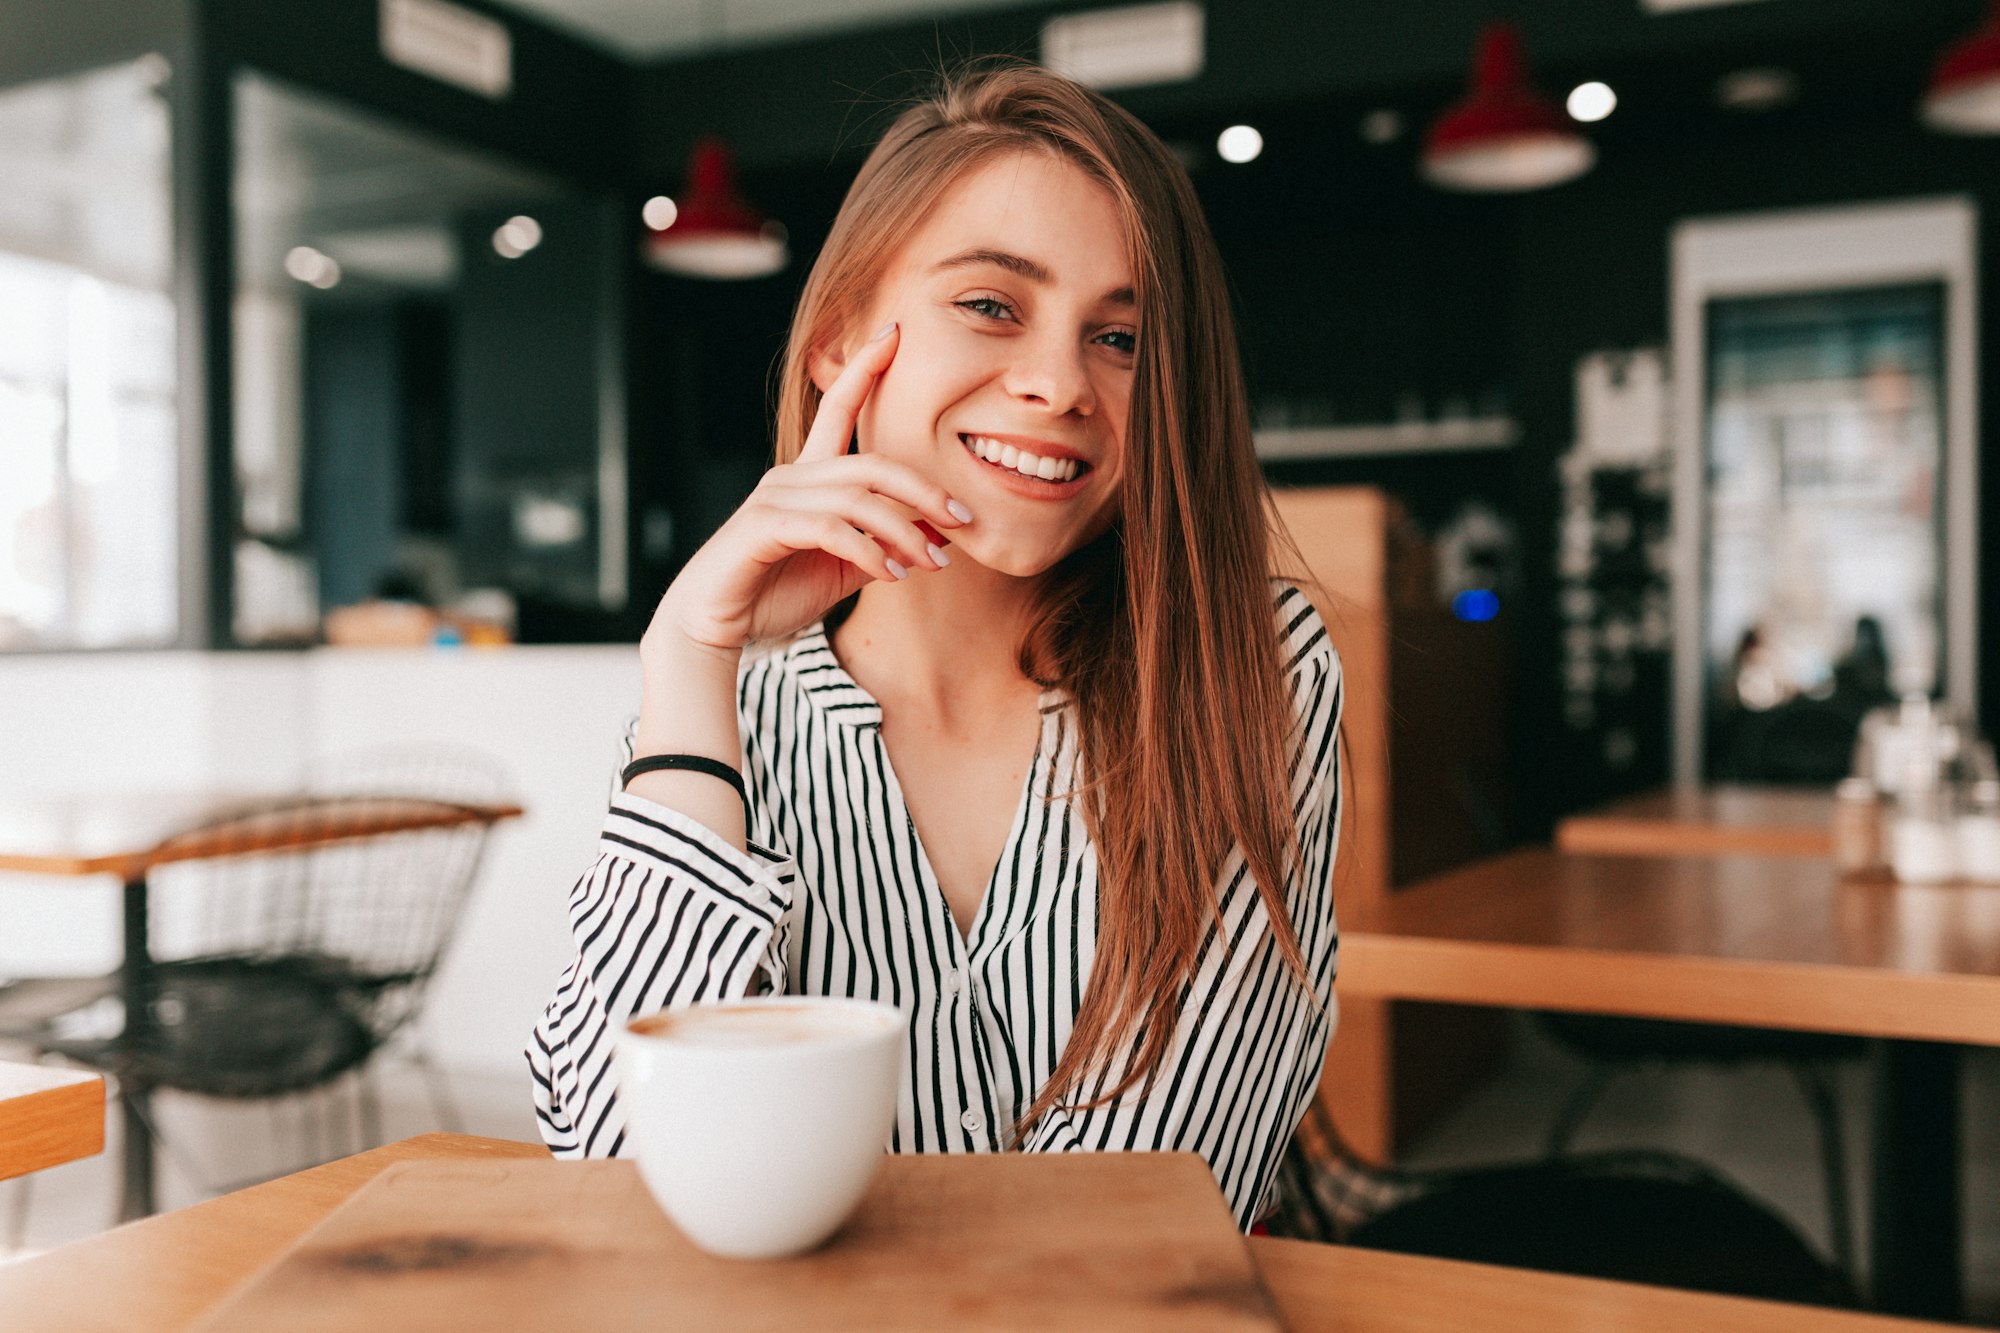 Adorable charming lady with long hair wearing trendy blouse sitting in cafeteria with great smile